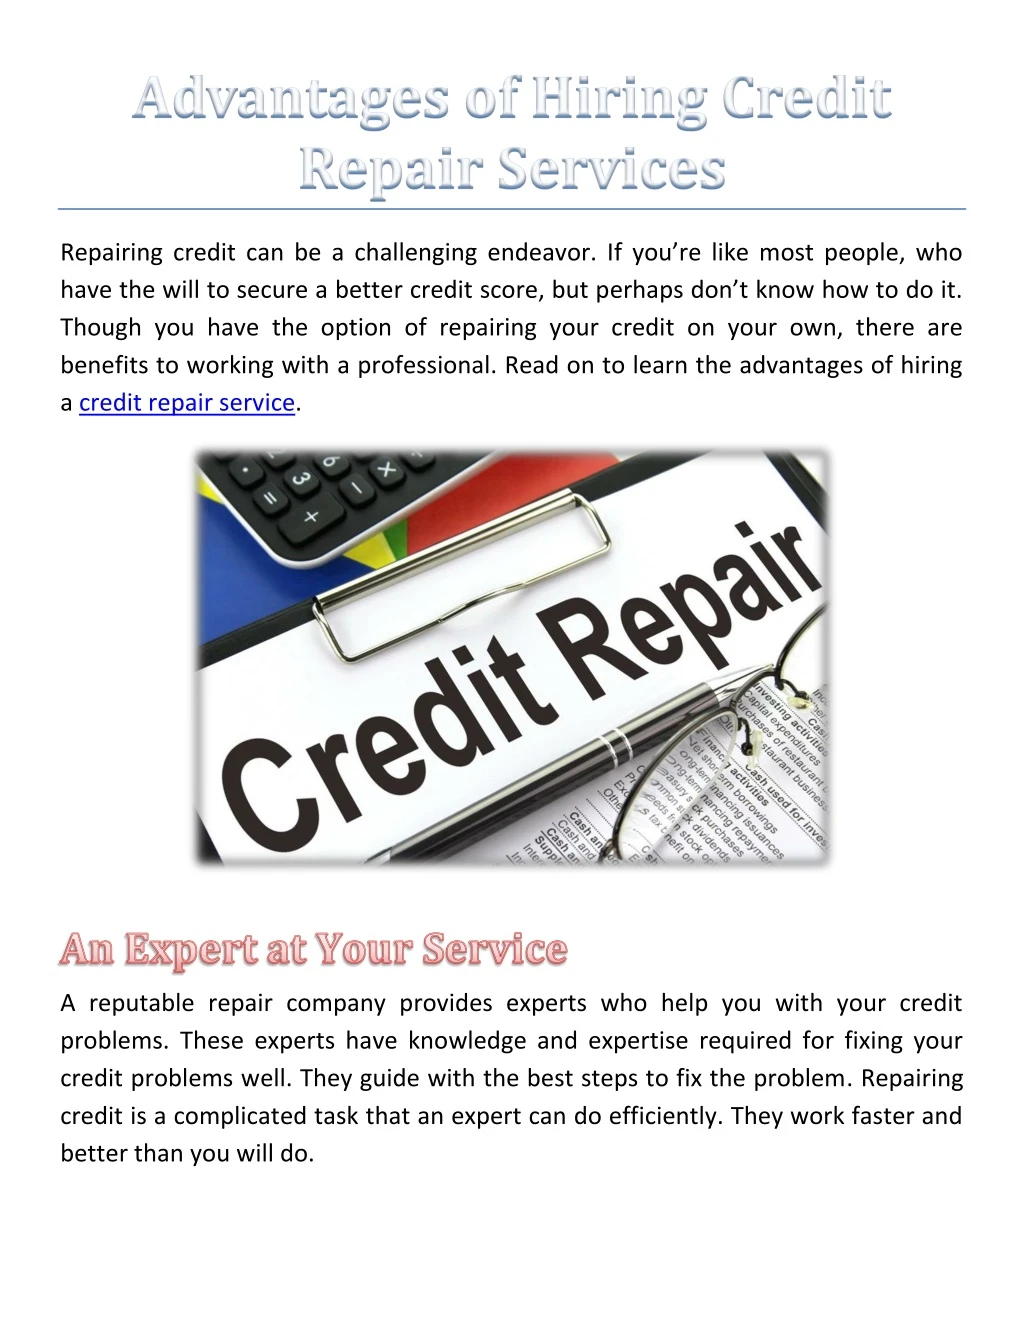 repairing credit can be a challenging endeavor